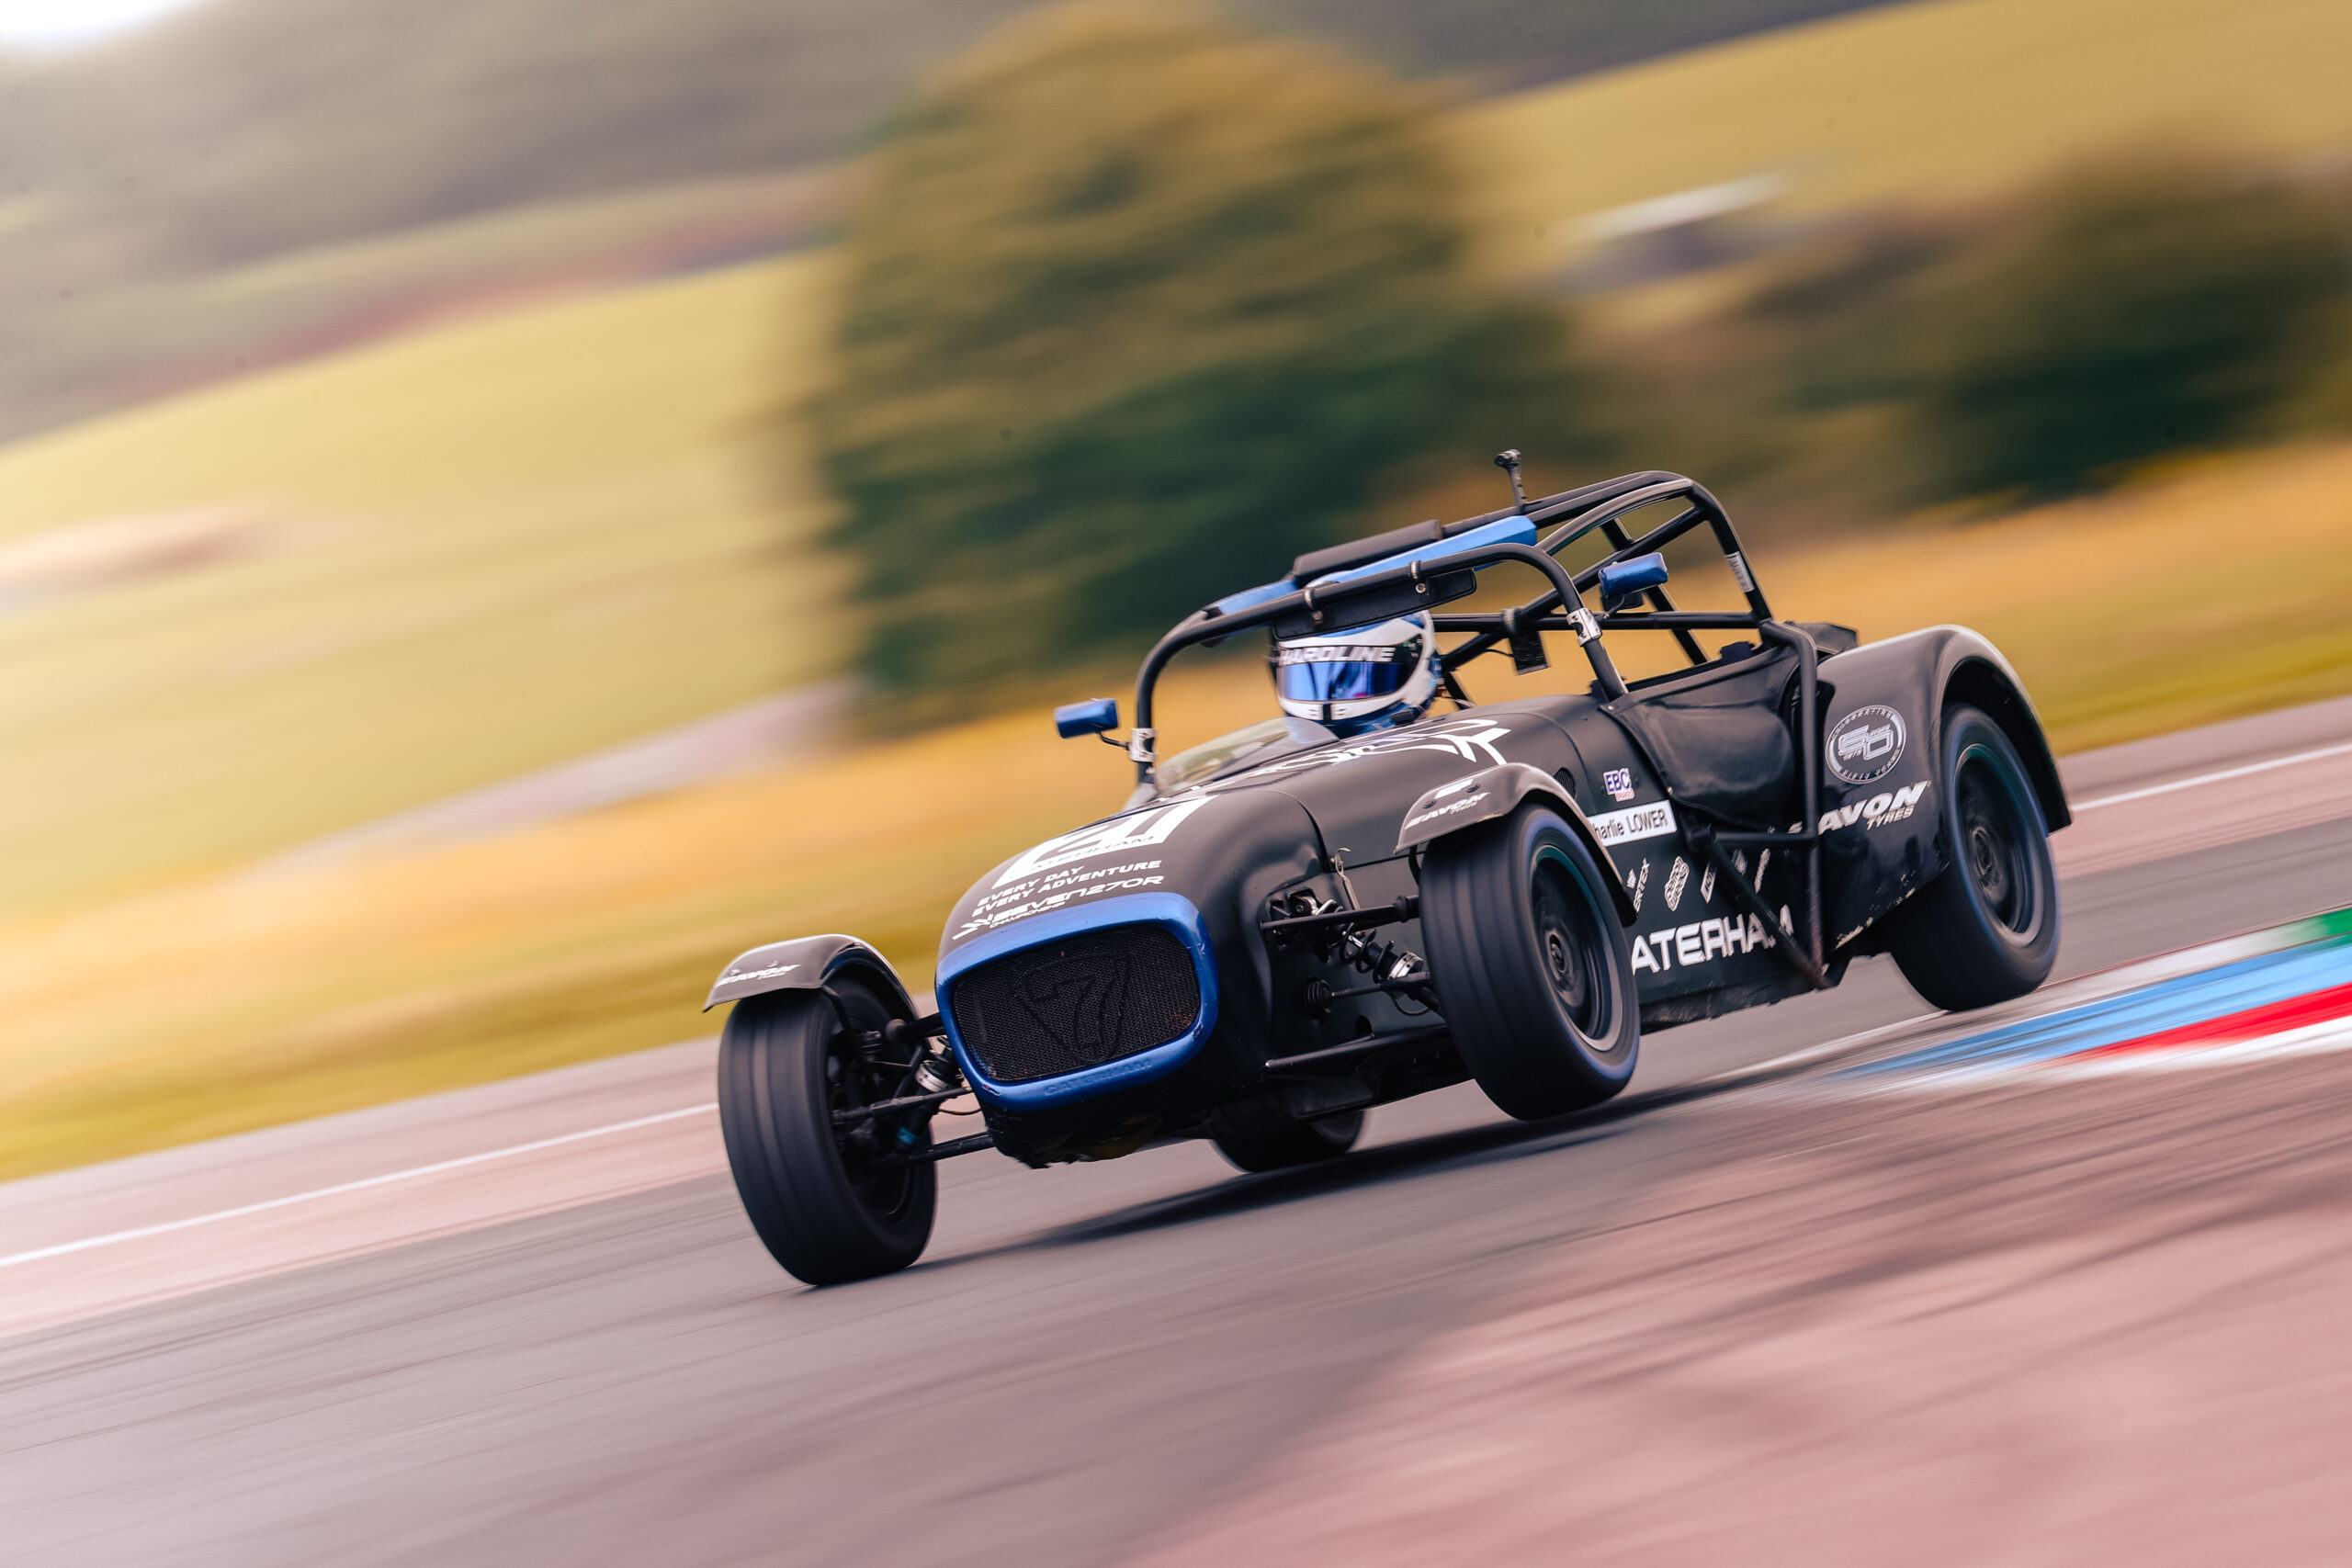 RP-X™-Equipped Racers Conquer Thruxton in 270R Caterham Championship